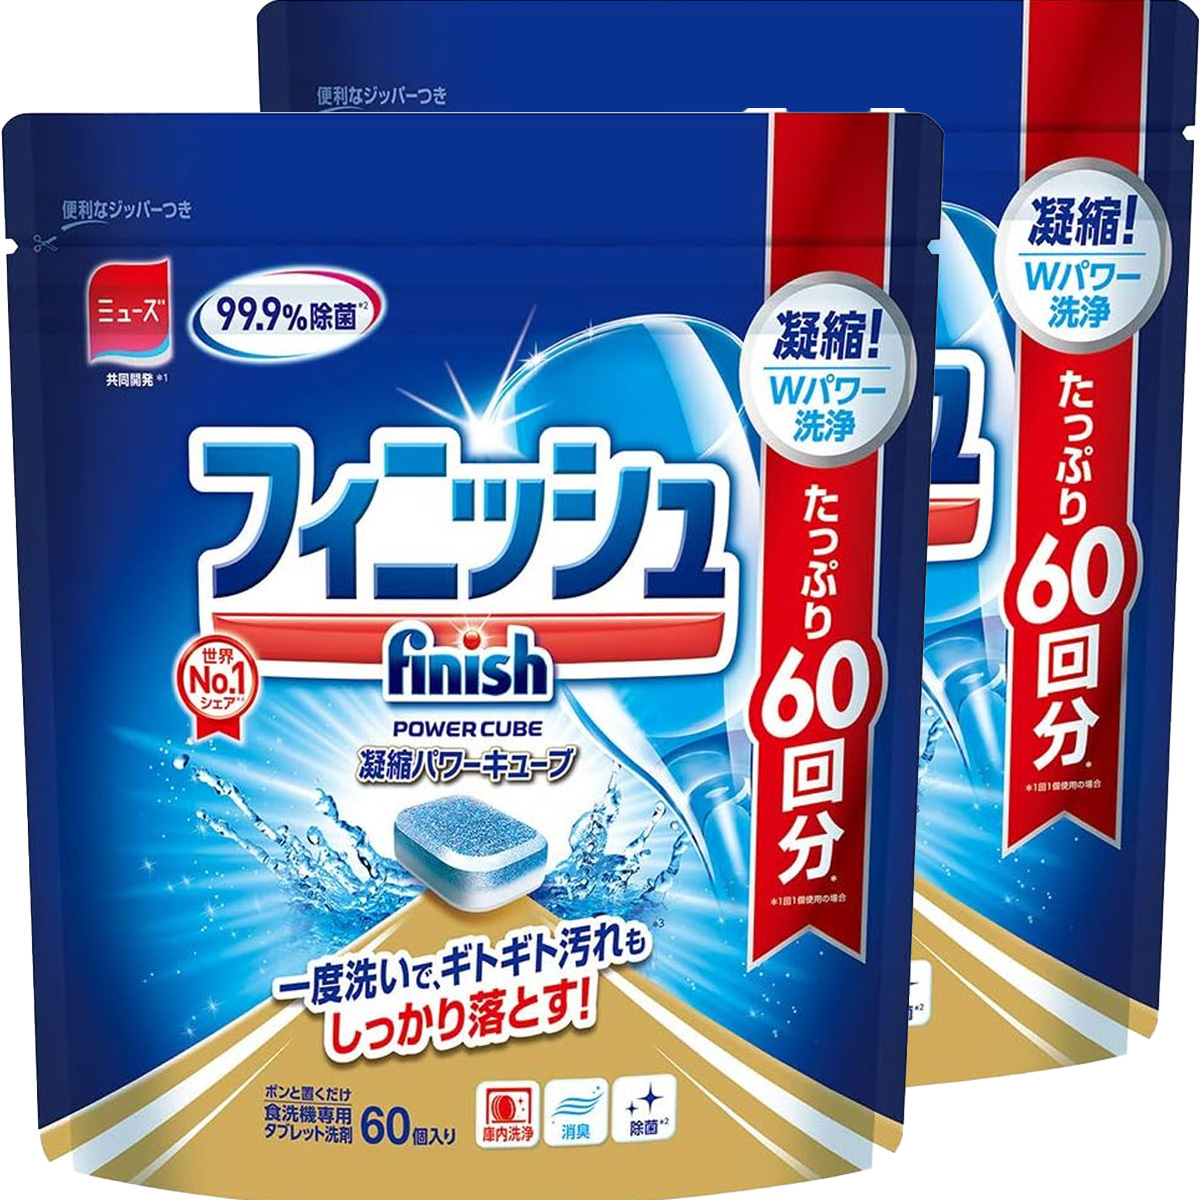 Finish 99.9% Sterilization Detergent for Kitchen Power Cube 60pcs Refill Pack *【2 packs】00677(Parallel import)